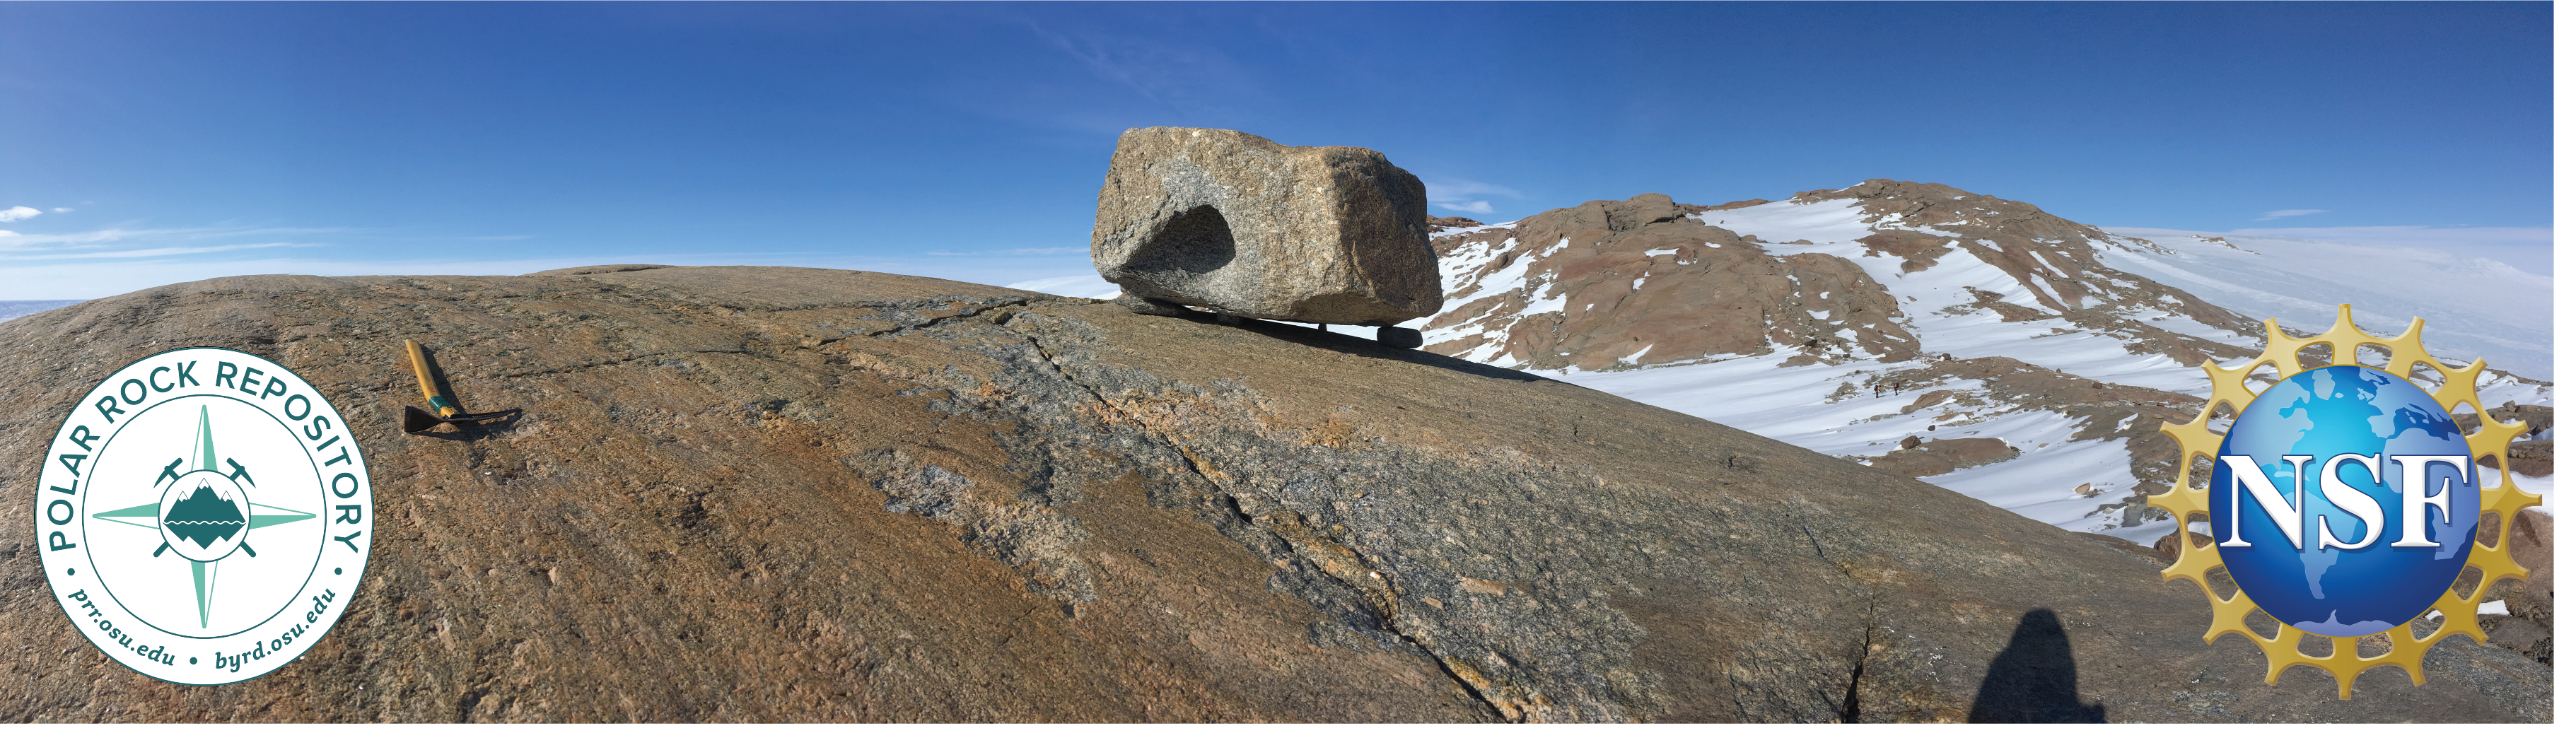 A boulder on top of a rock slab with snowy mountain in background with blue skies and logos of PRR and NSF on bottom left and right of image.